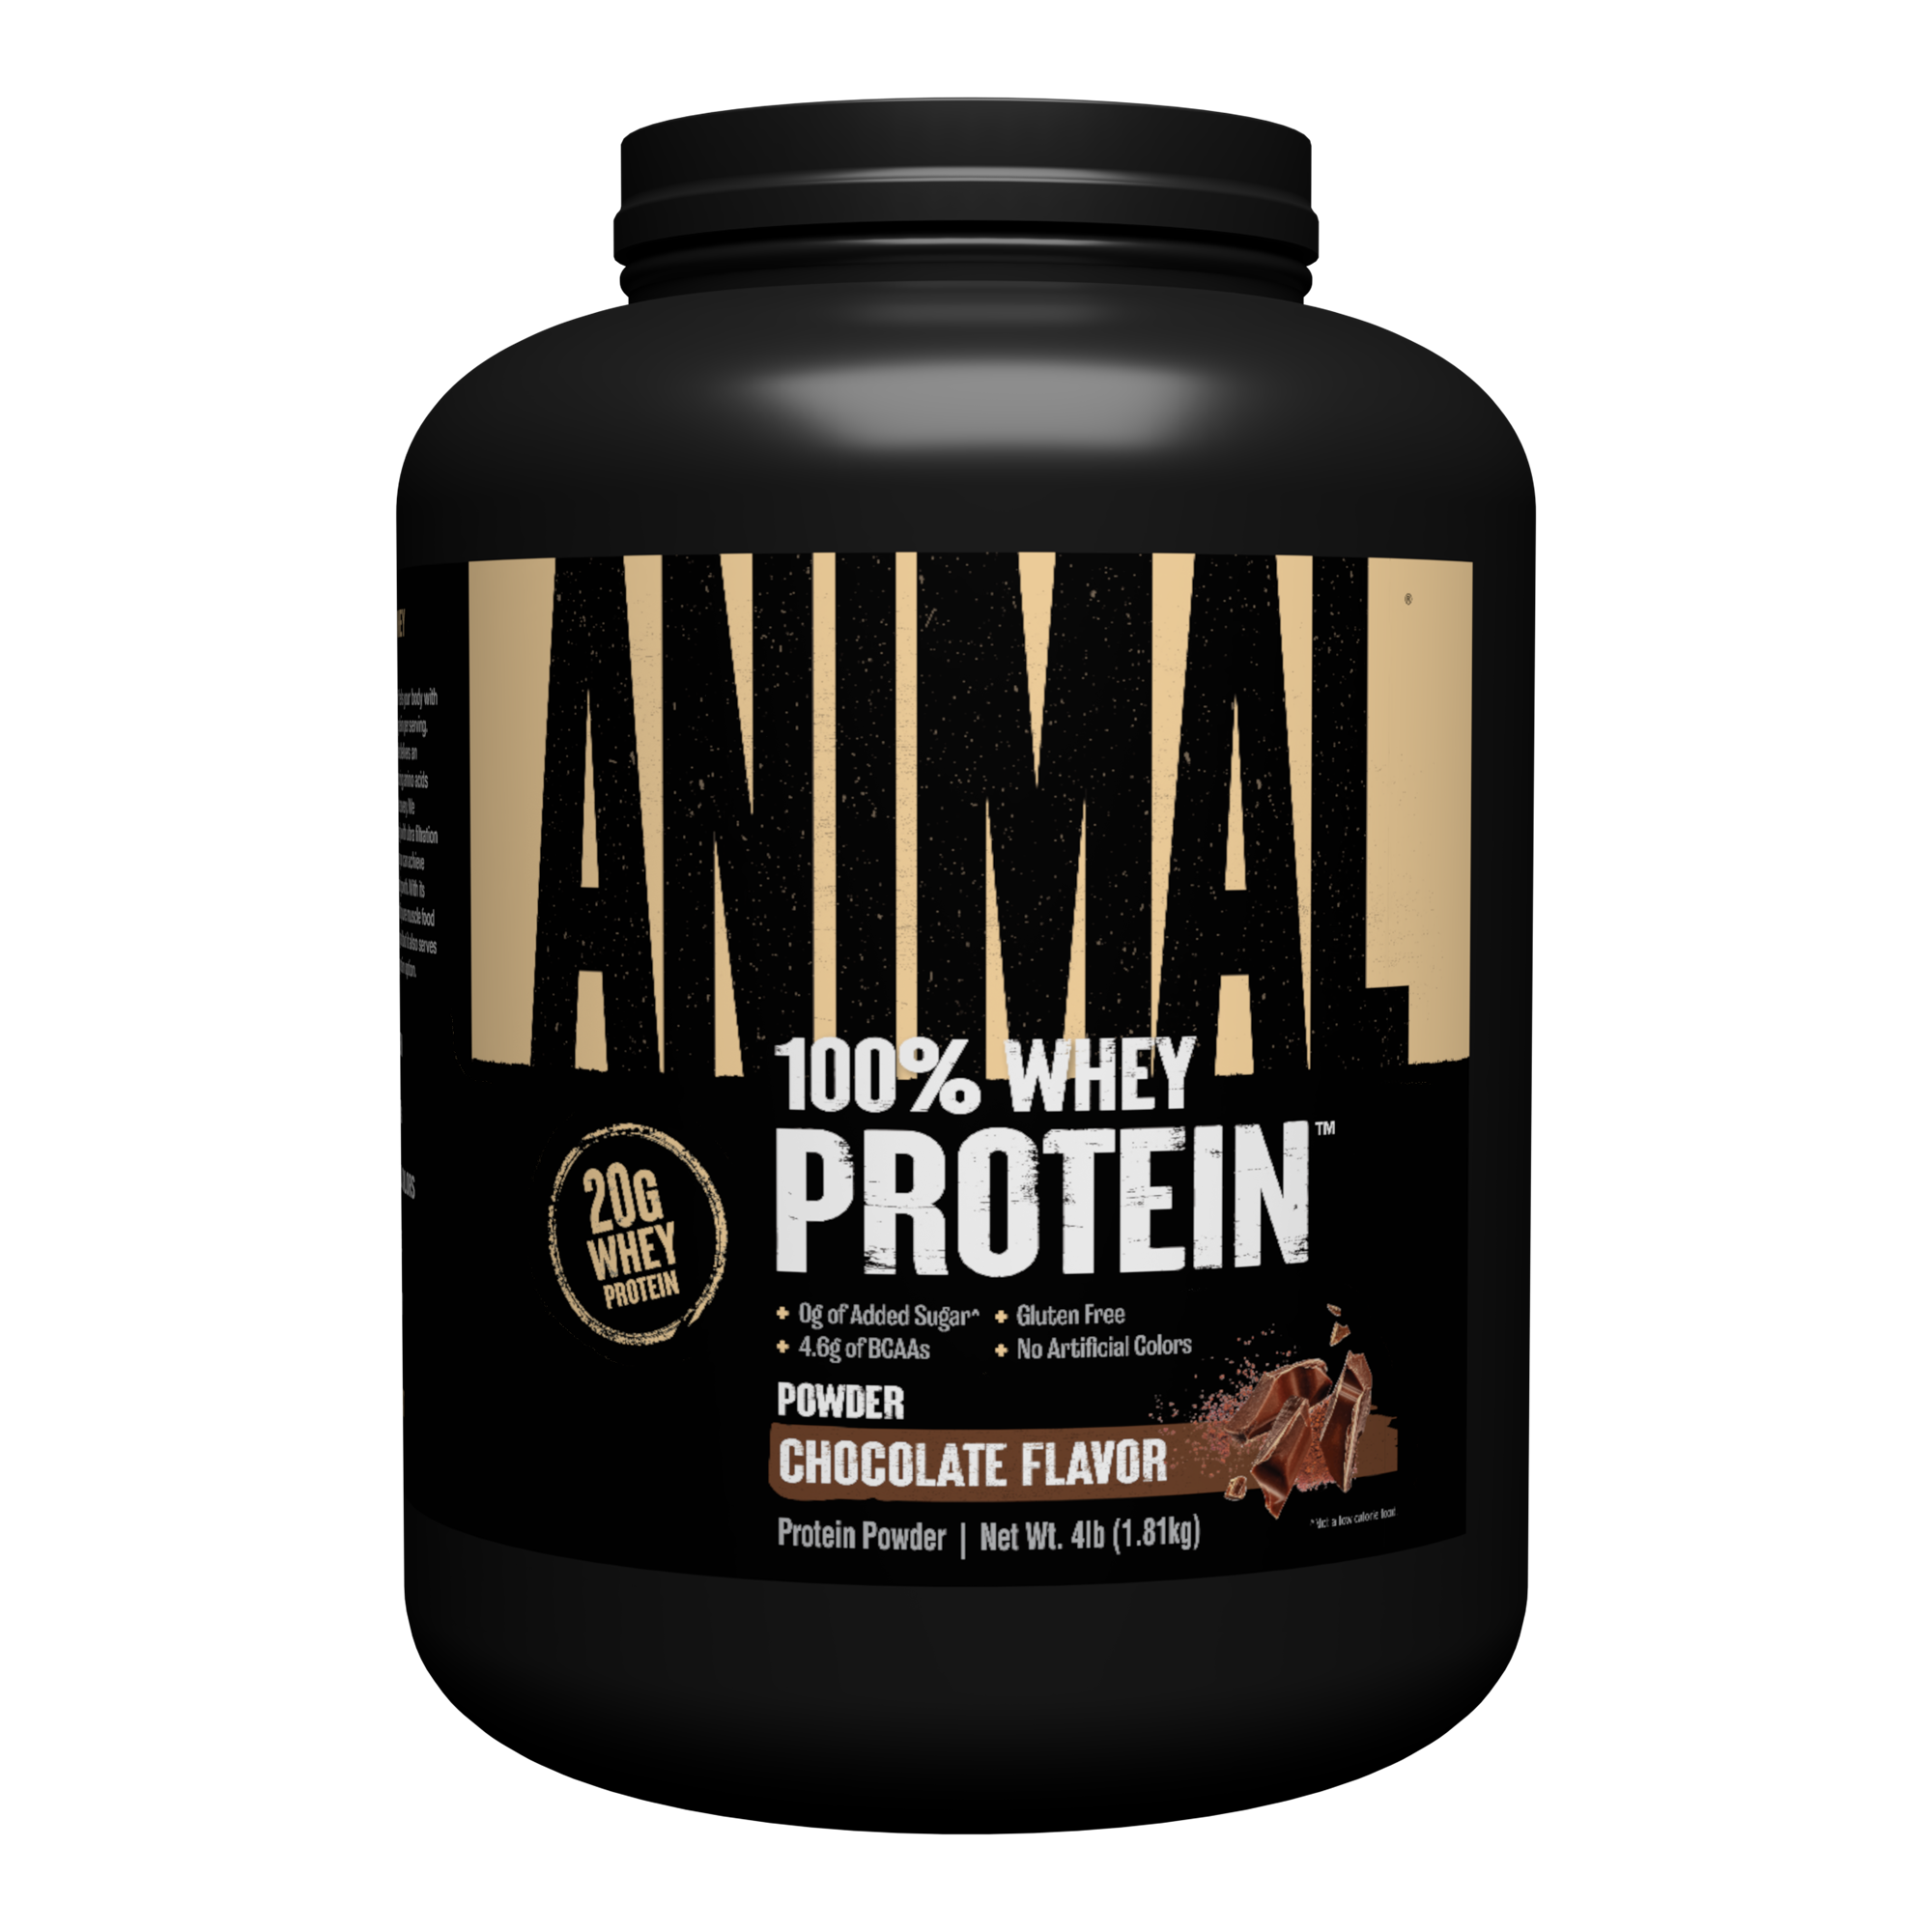 Animal 100% Whey Protein - A1 Supplements Store